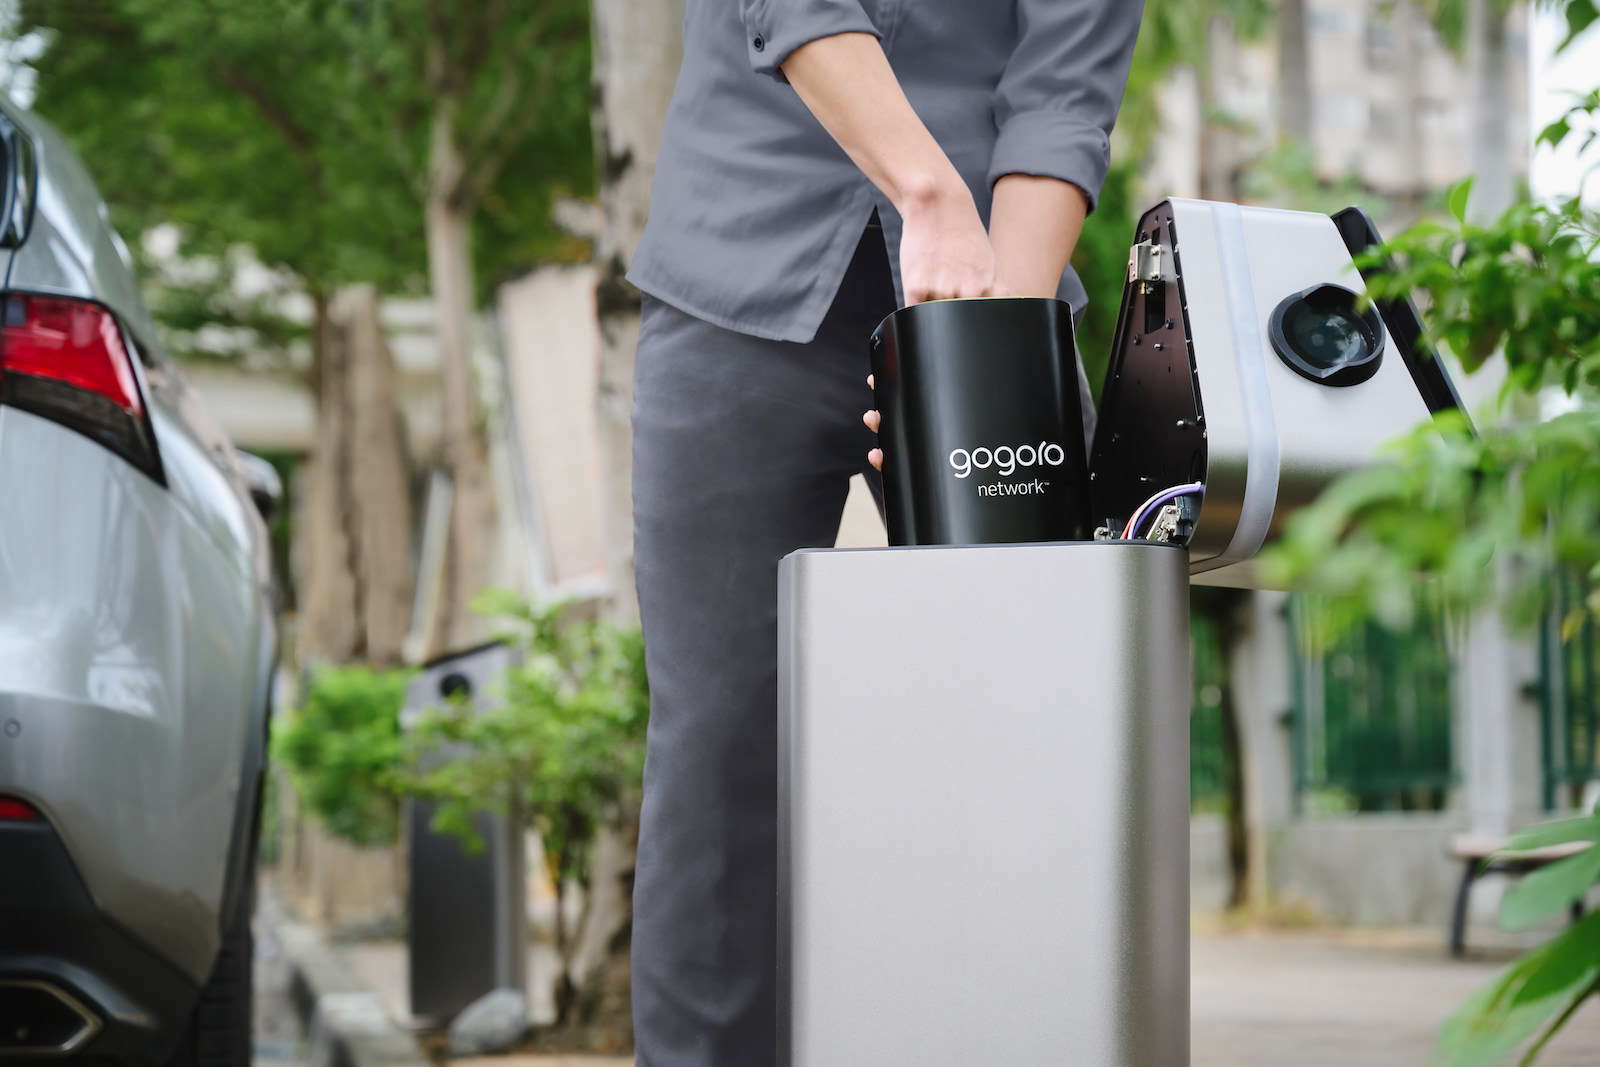 Gogoro launches New Swappable Battery initiative with the introduction of smart parking meters